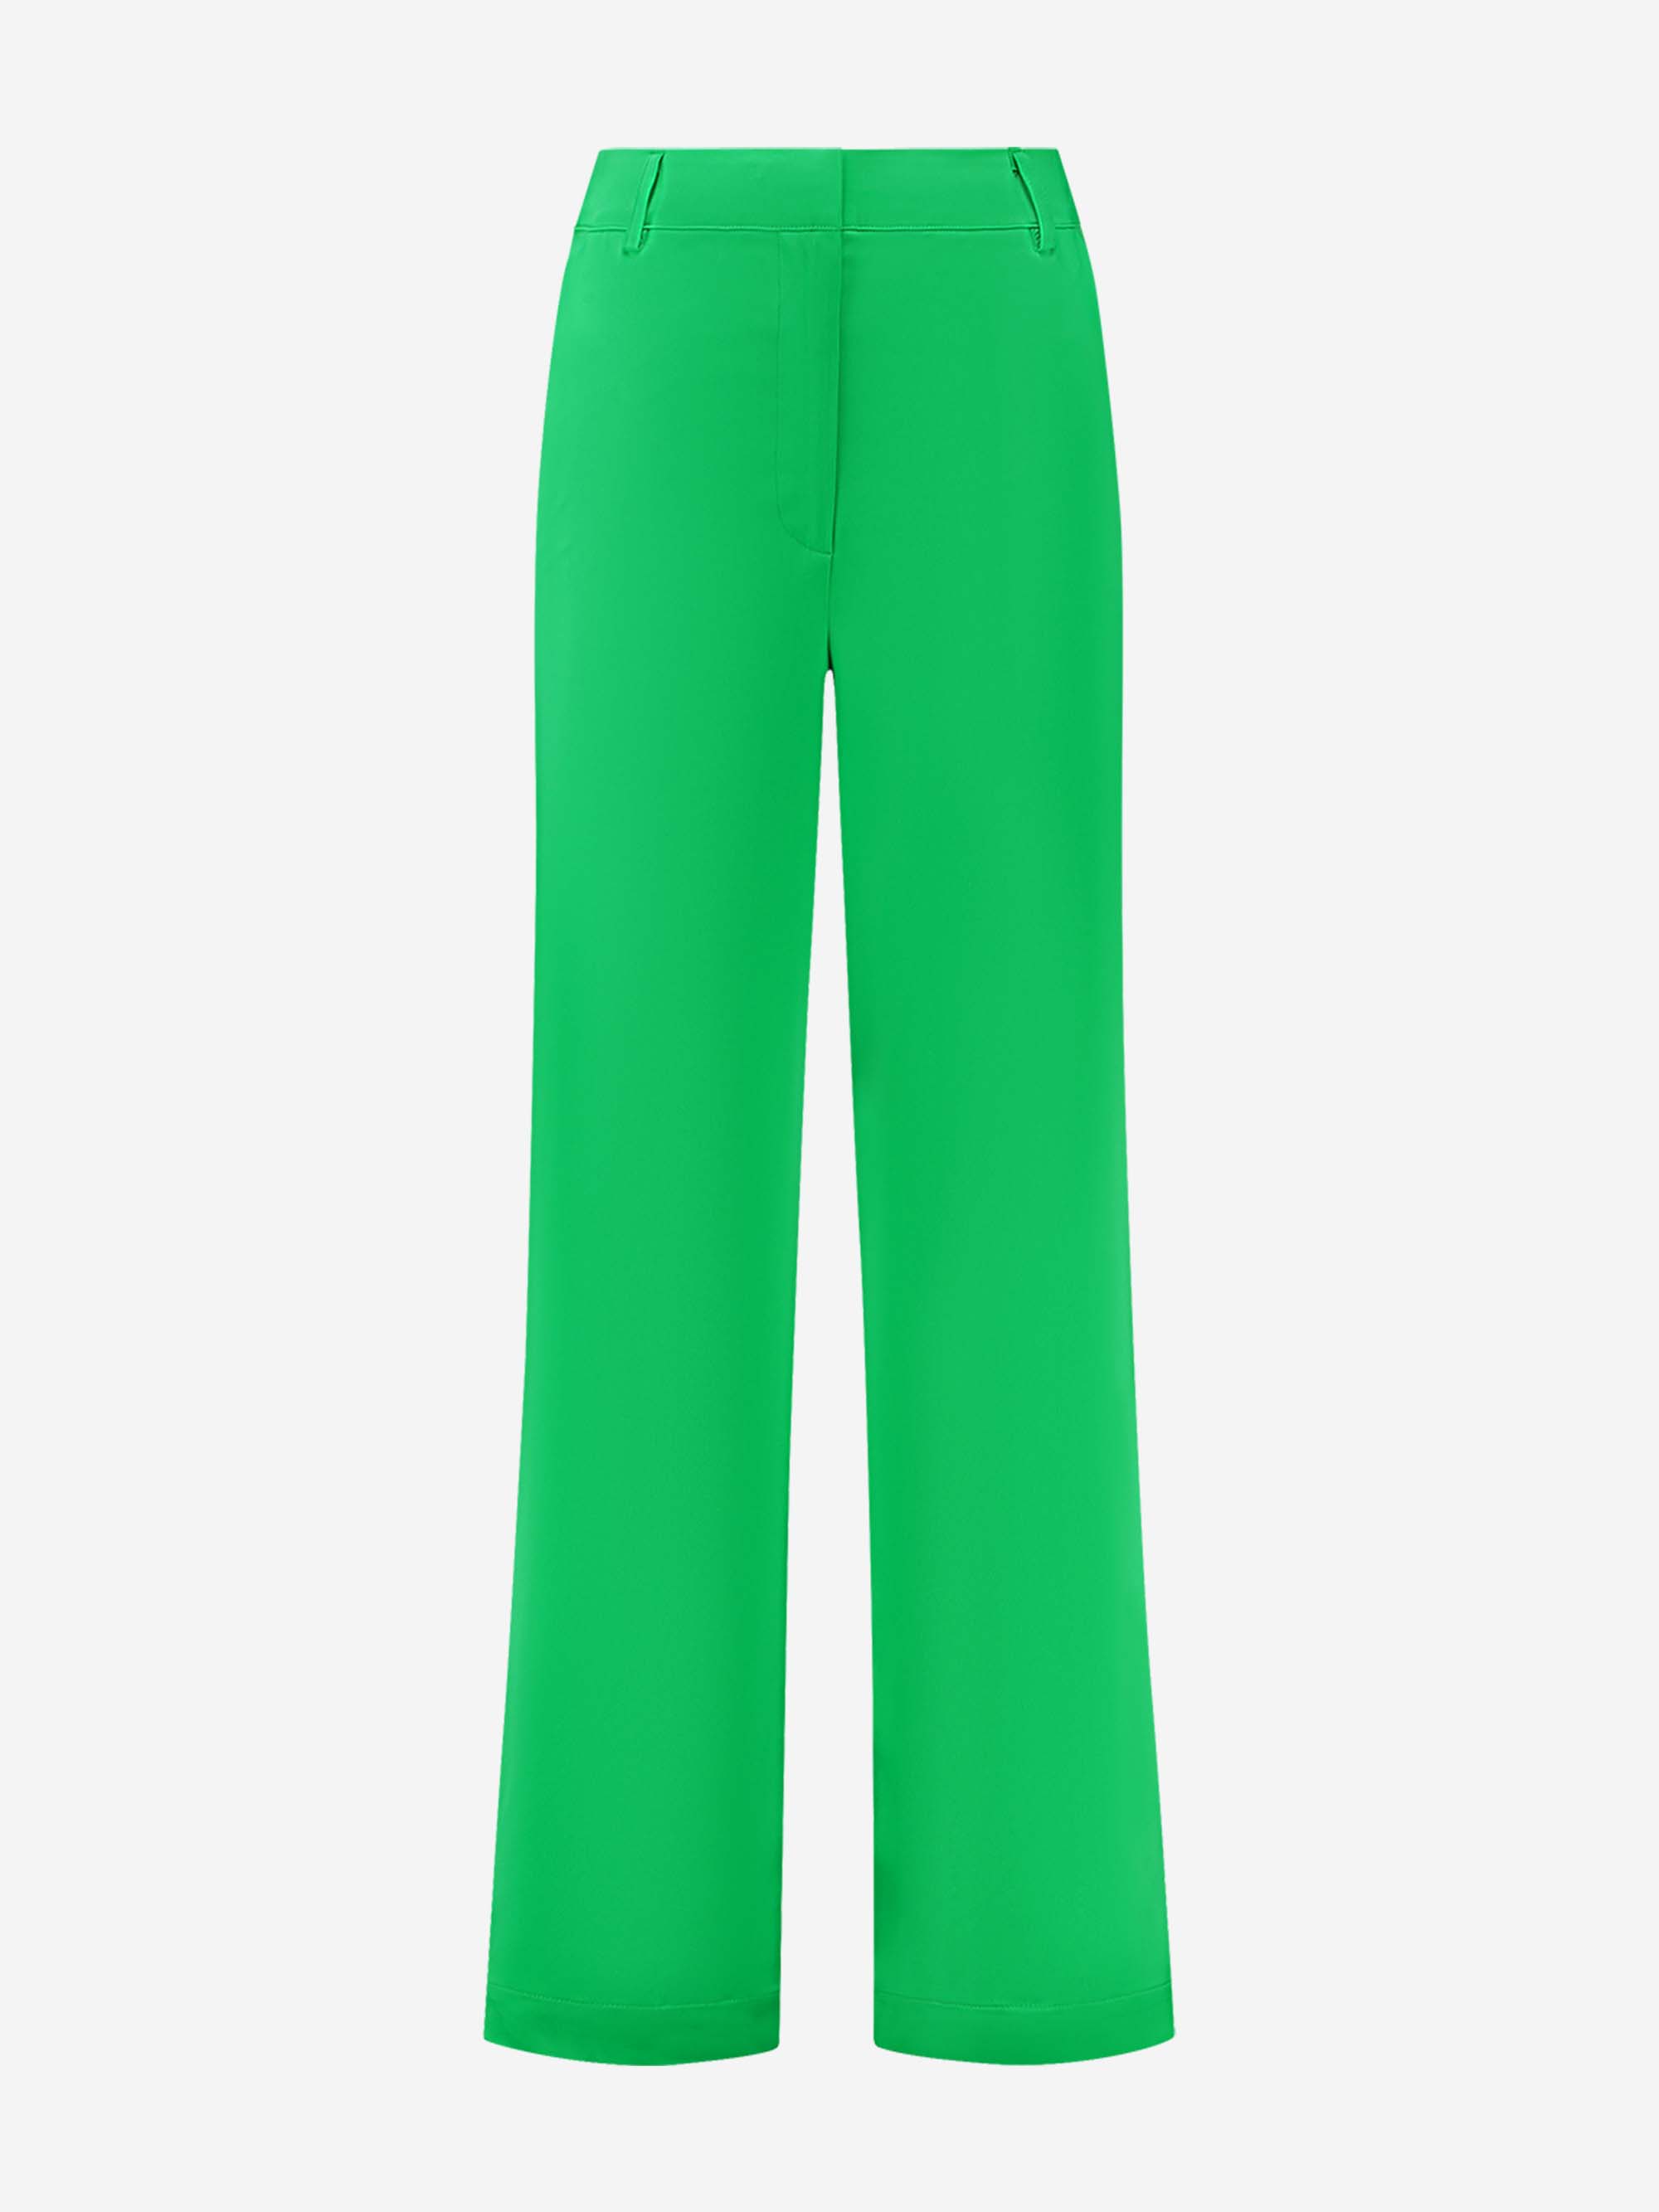 High rise satin look pants with straight fit